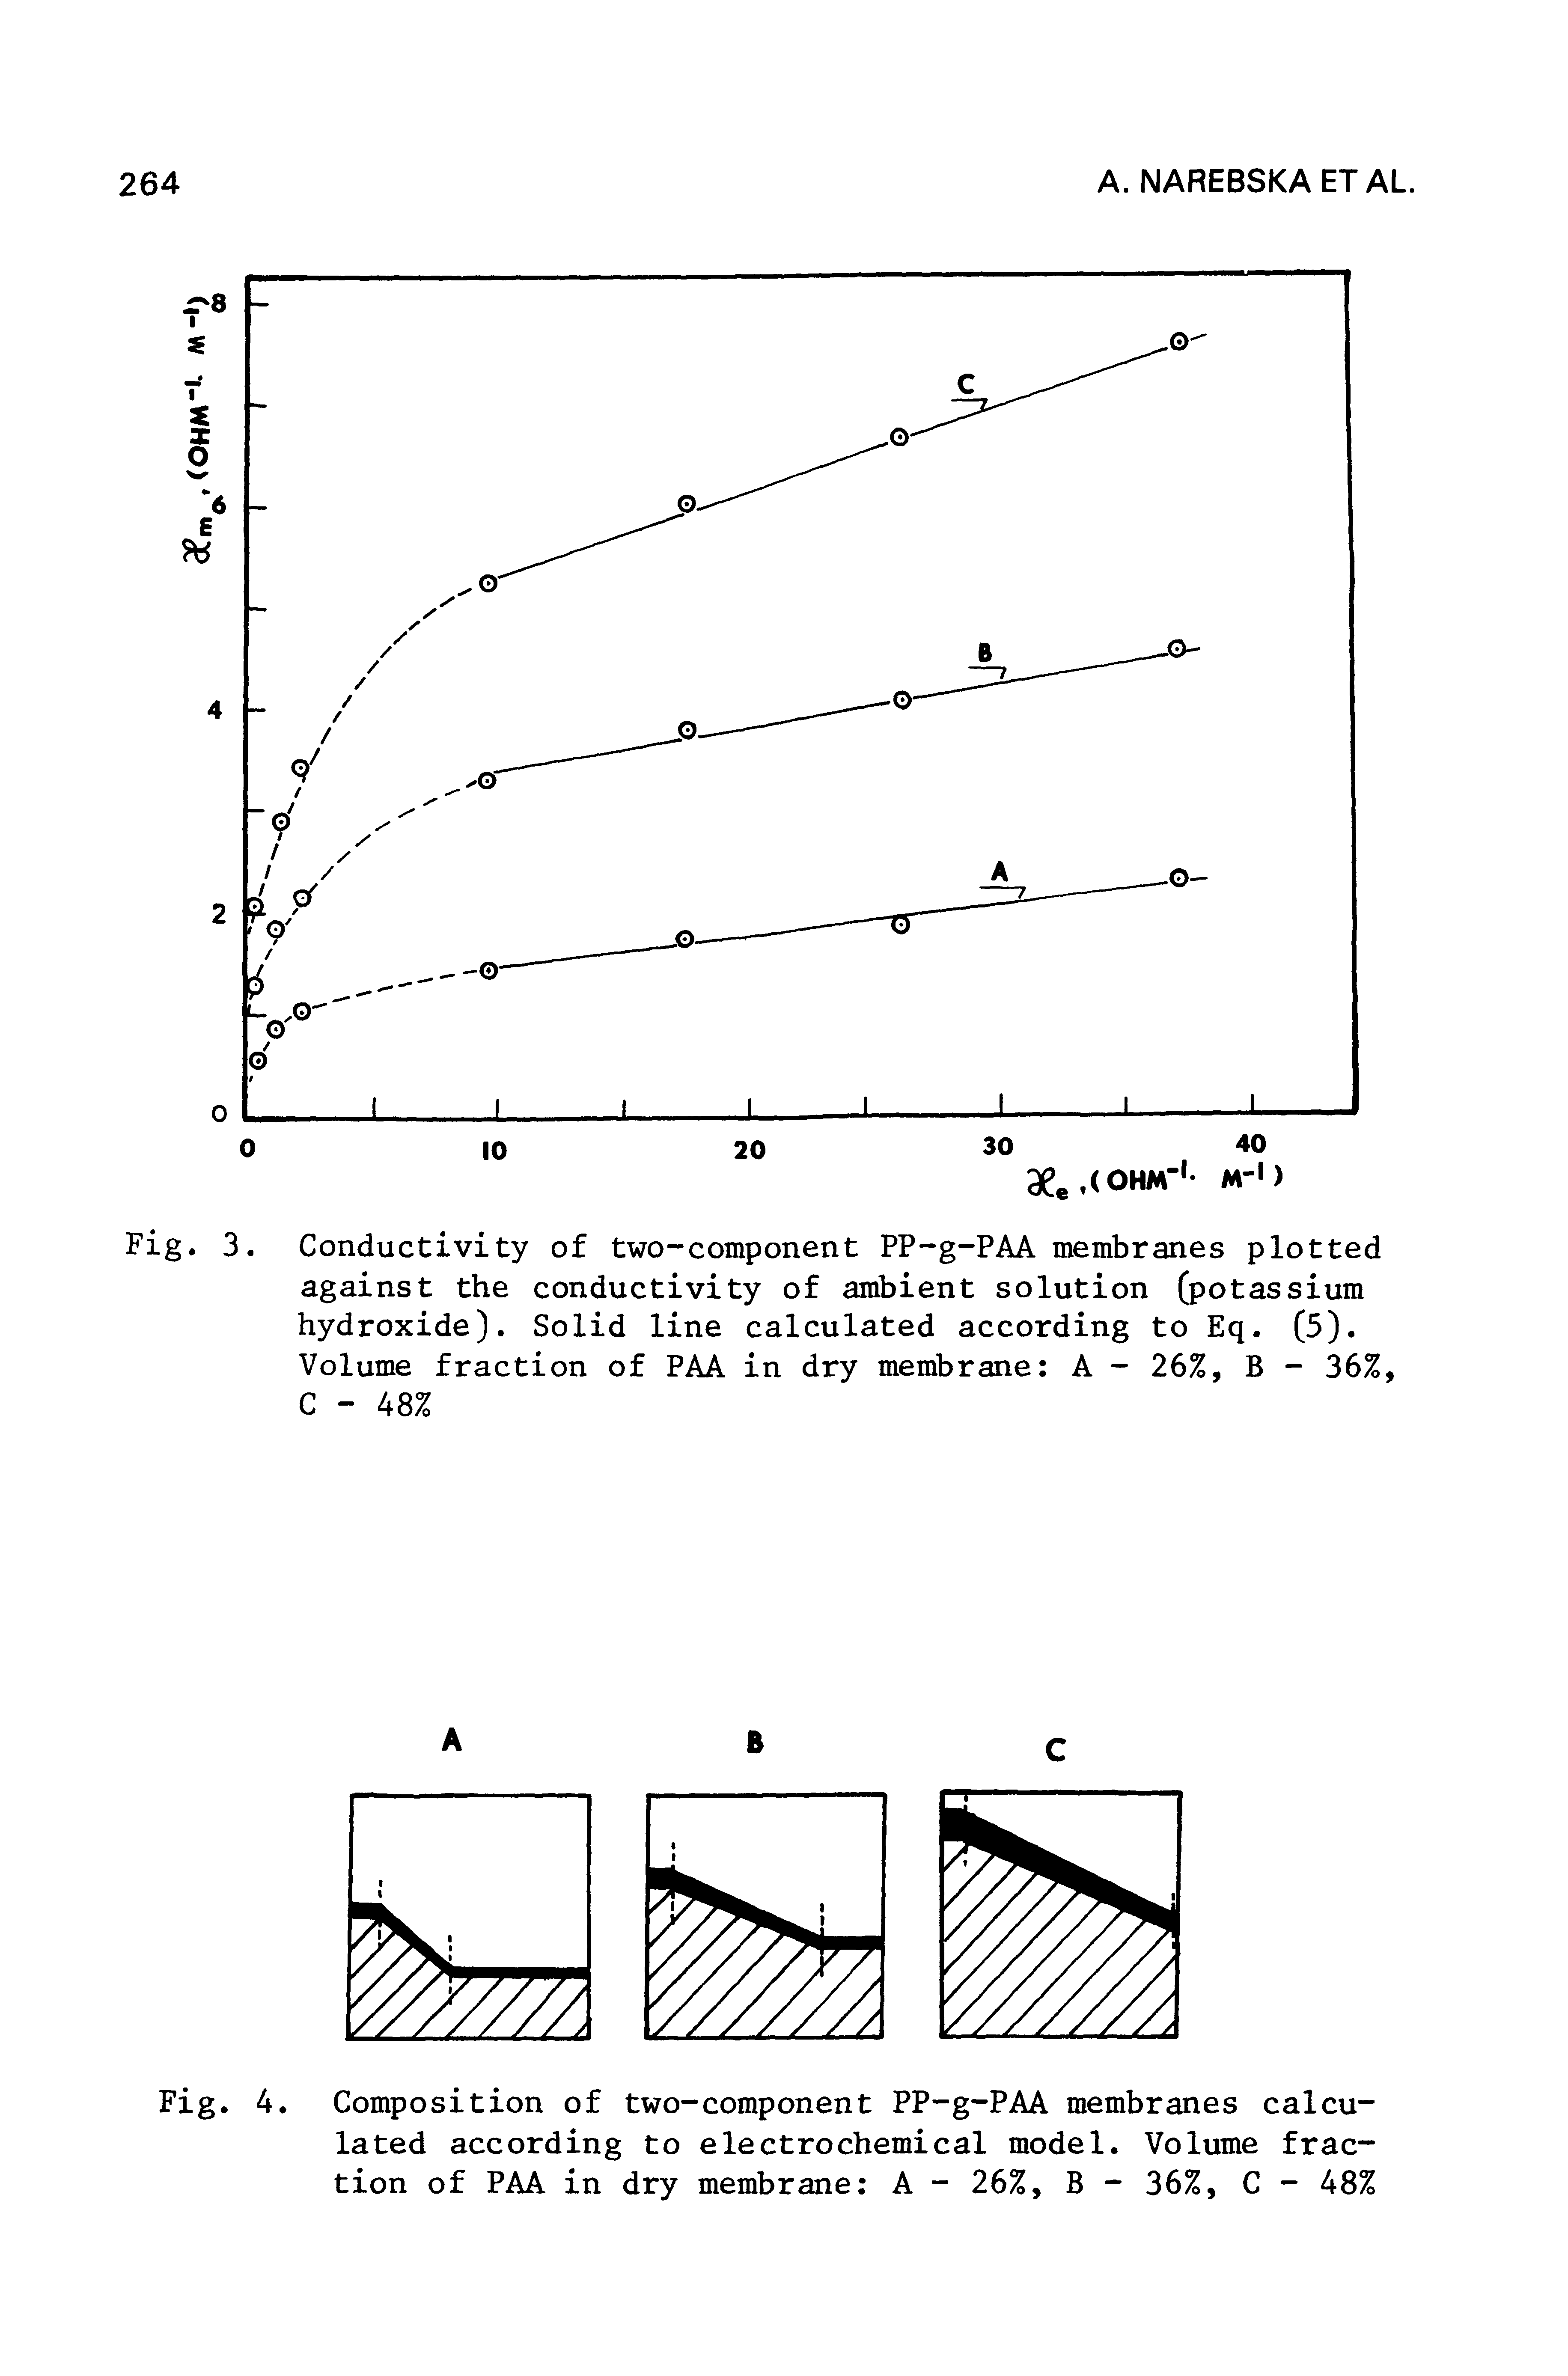 Fig. 3. Conductivity of two-component PP-g-PAA membranes plotted against the conductivity of ambient solution (potassium hydroxide). Solid line calculated according to Eq. (5). Volume fraction of PAA in dry membrane A - 26%, B - 36%,...